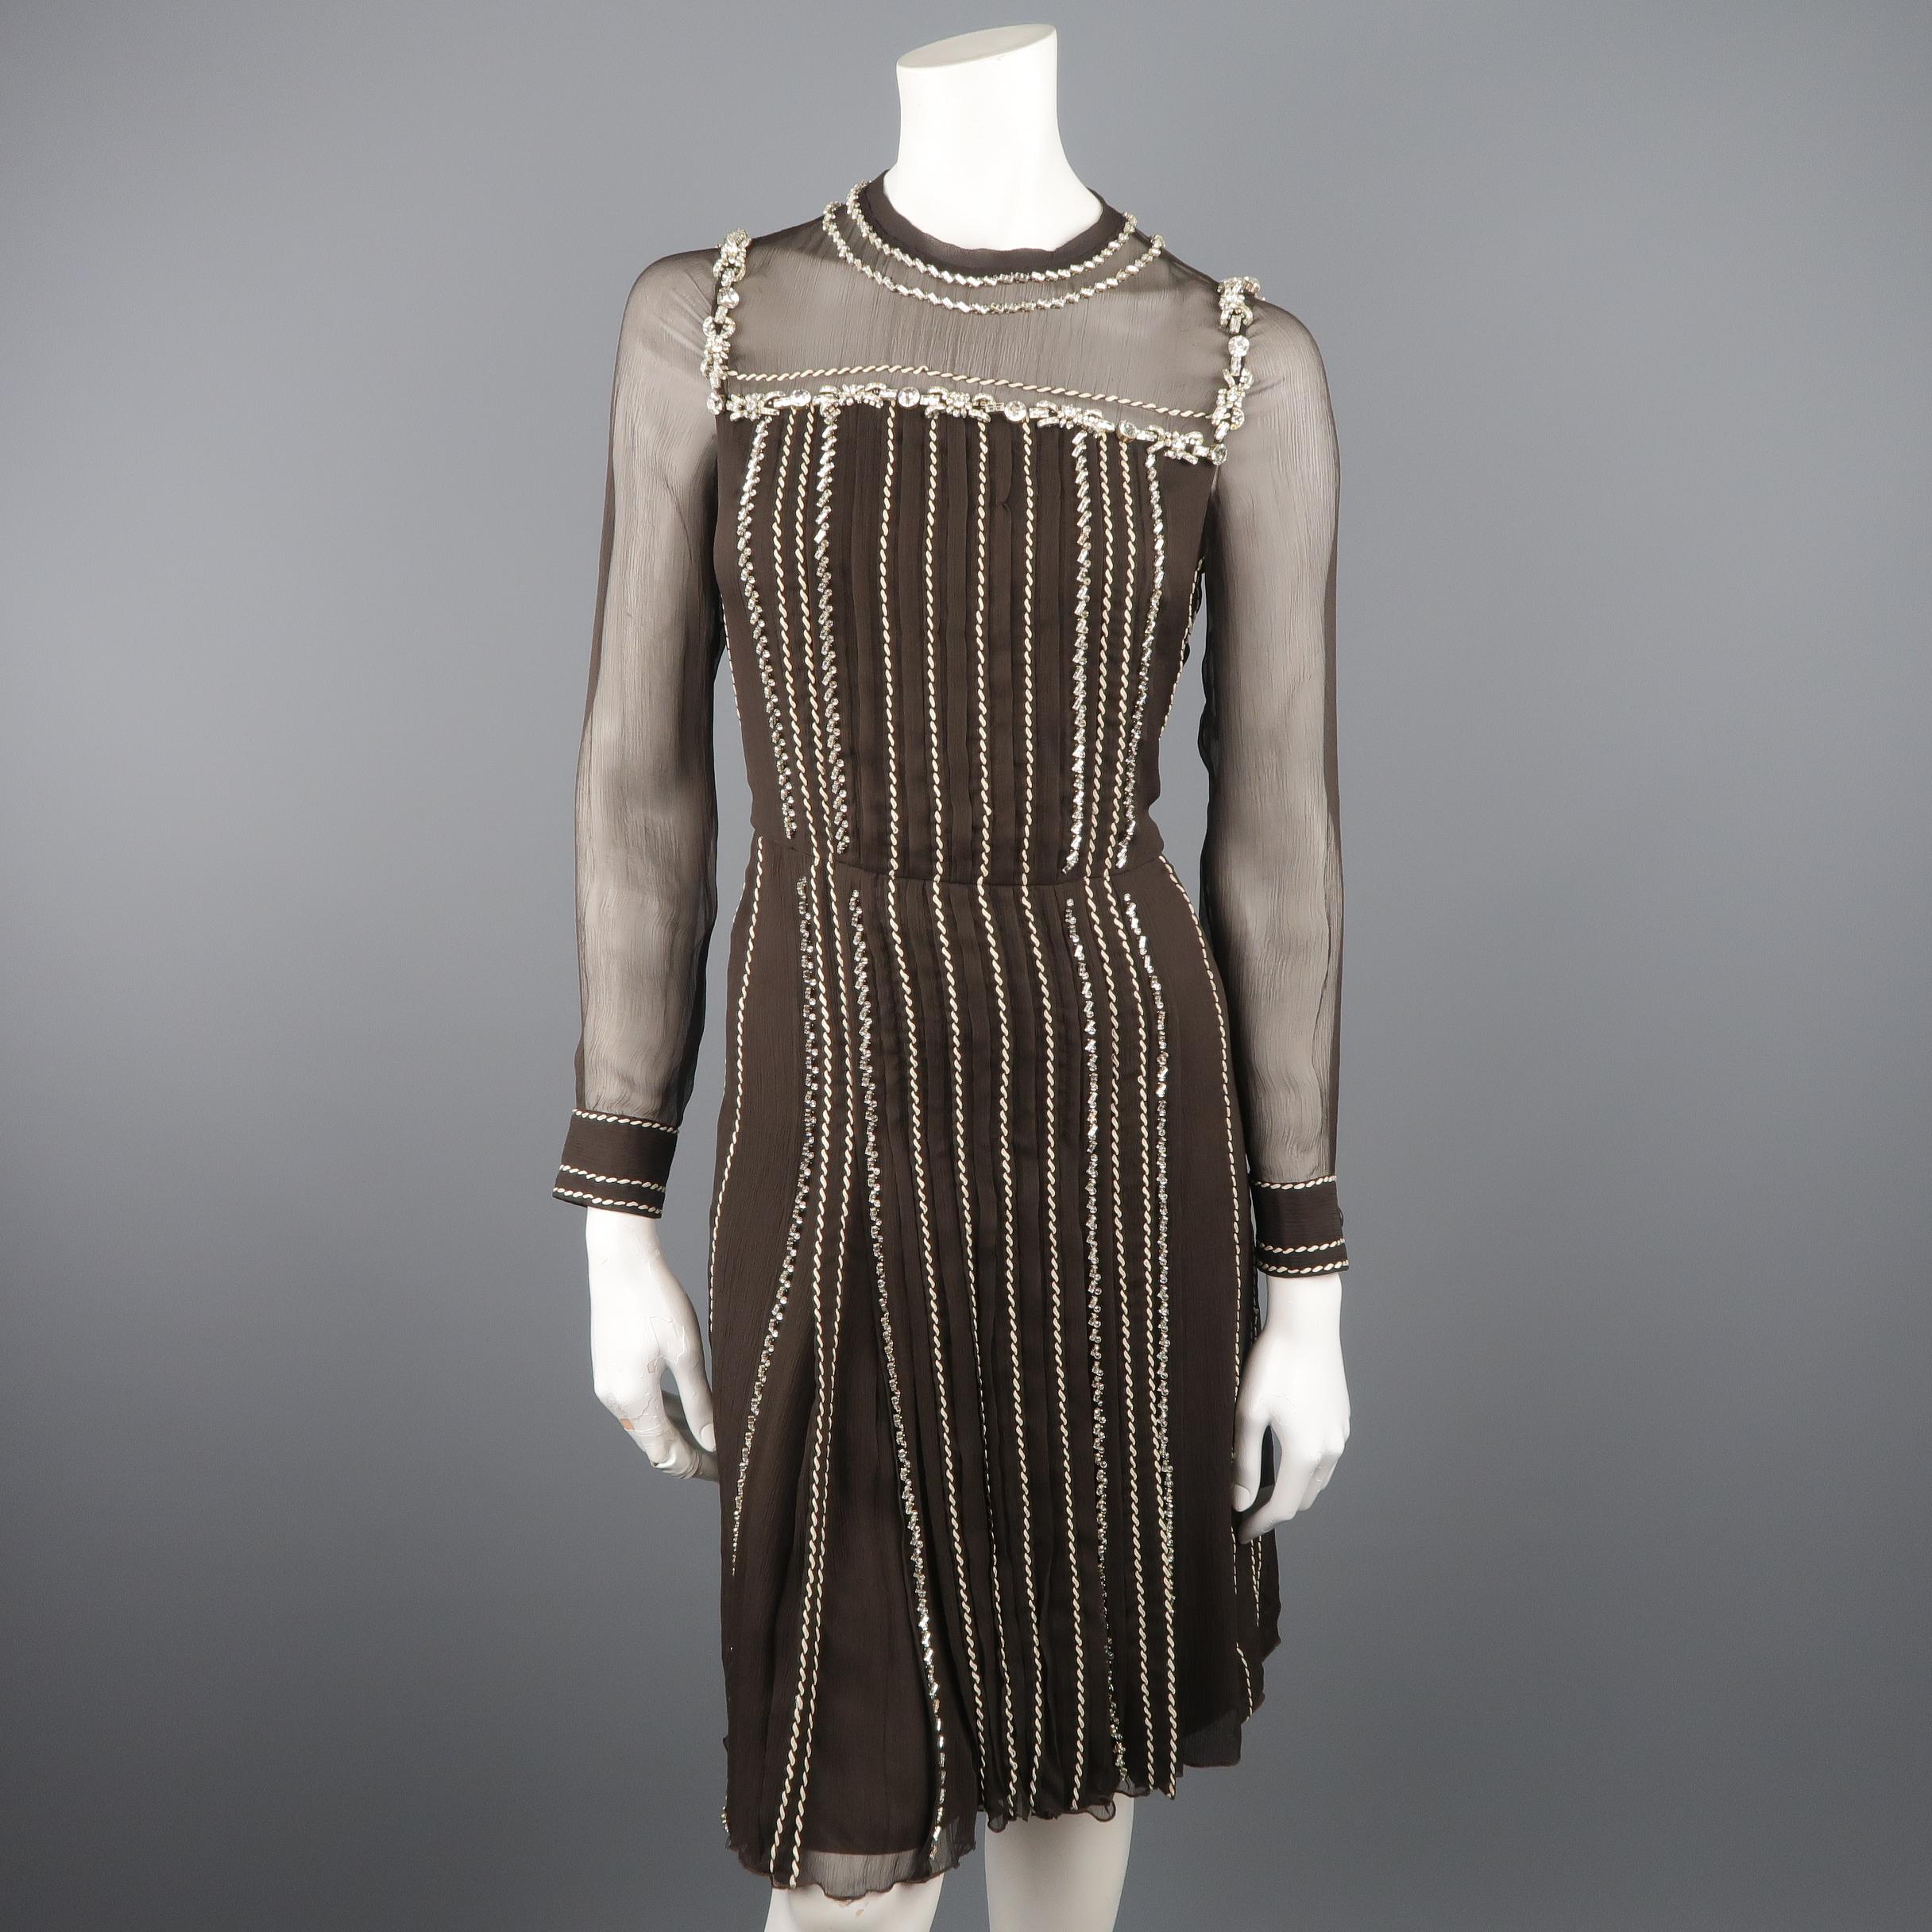 This gorgeous PRADA cocktail dress comes in a chocolate brown textured silk chiffon with a round neckline, sheer chest and long sleeves, pleated skirt, contrast whipstitch details, and crystal piping throughout. With belt. Made in Italy.
 
Excellent